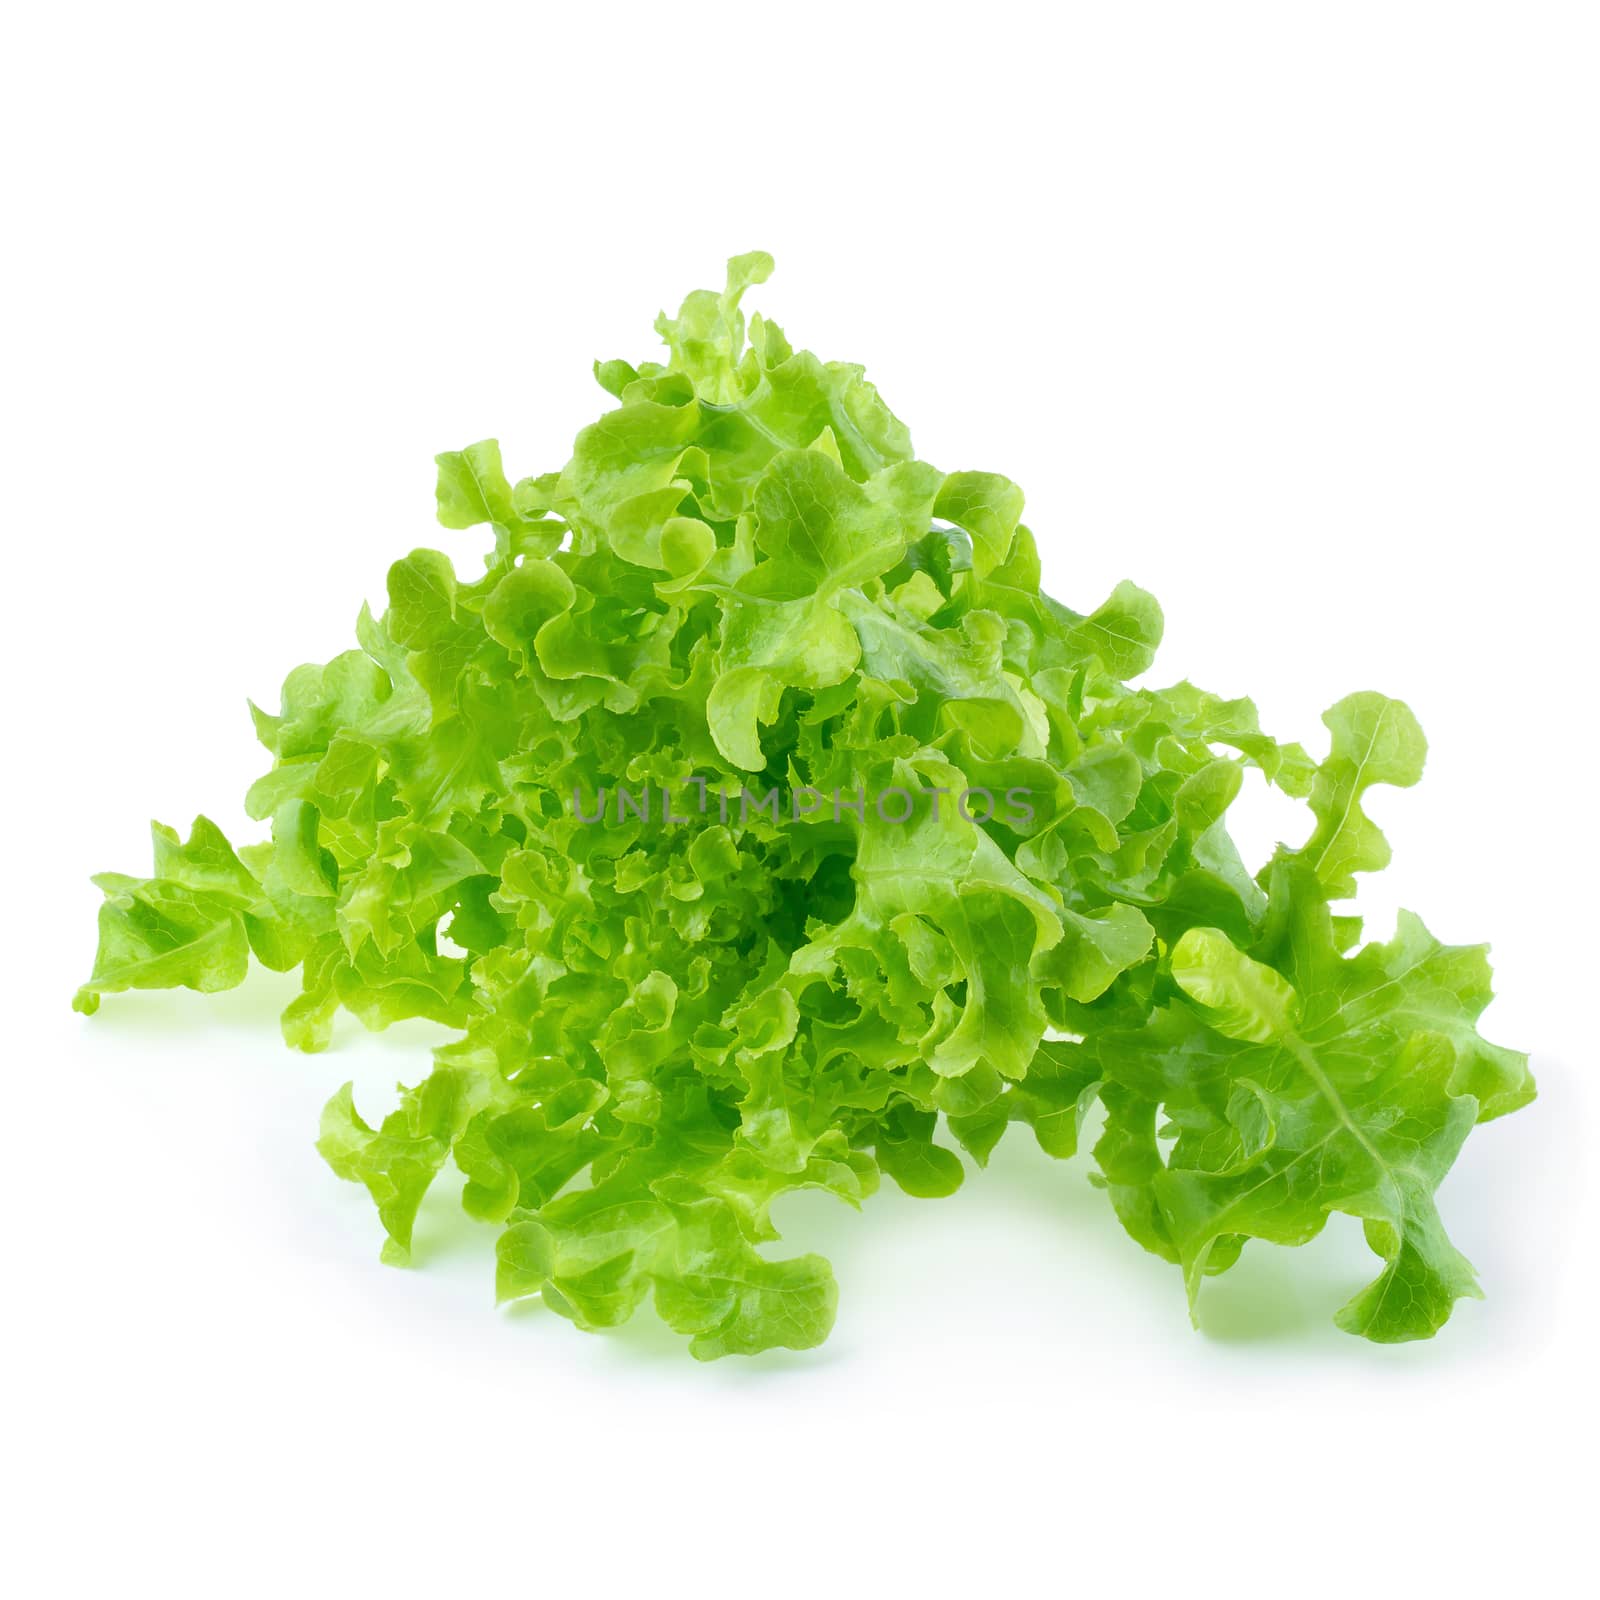 Green oak leaf lettuce isolated on a white background by kaiskynet